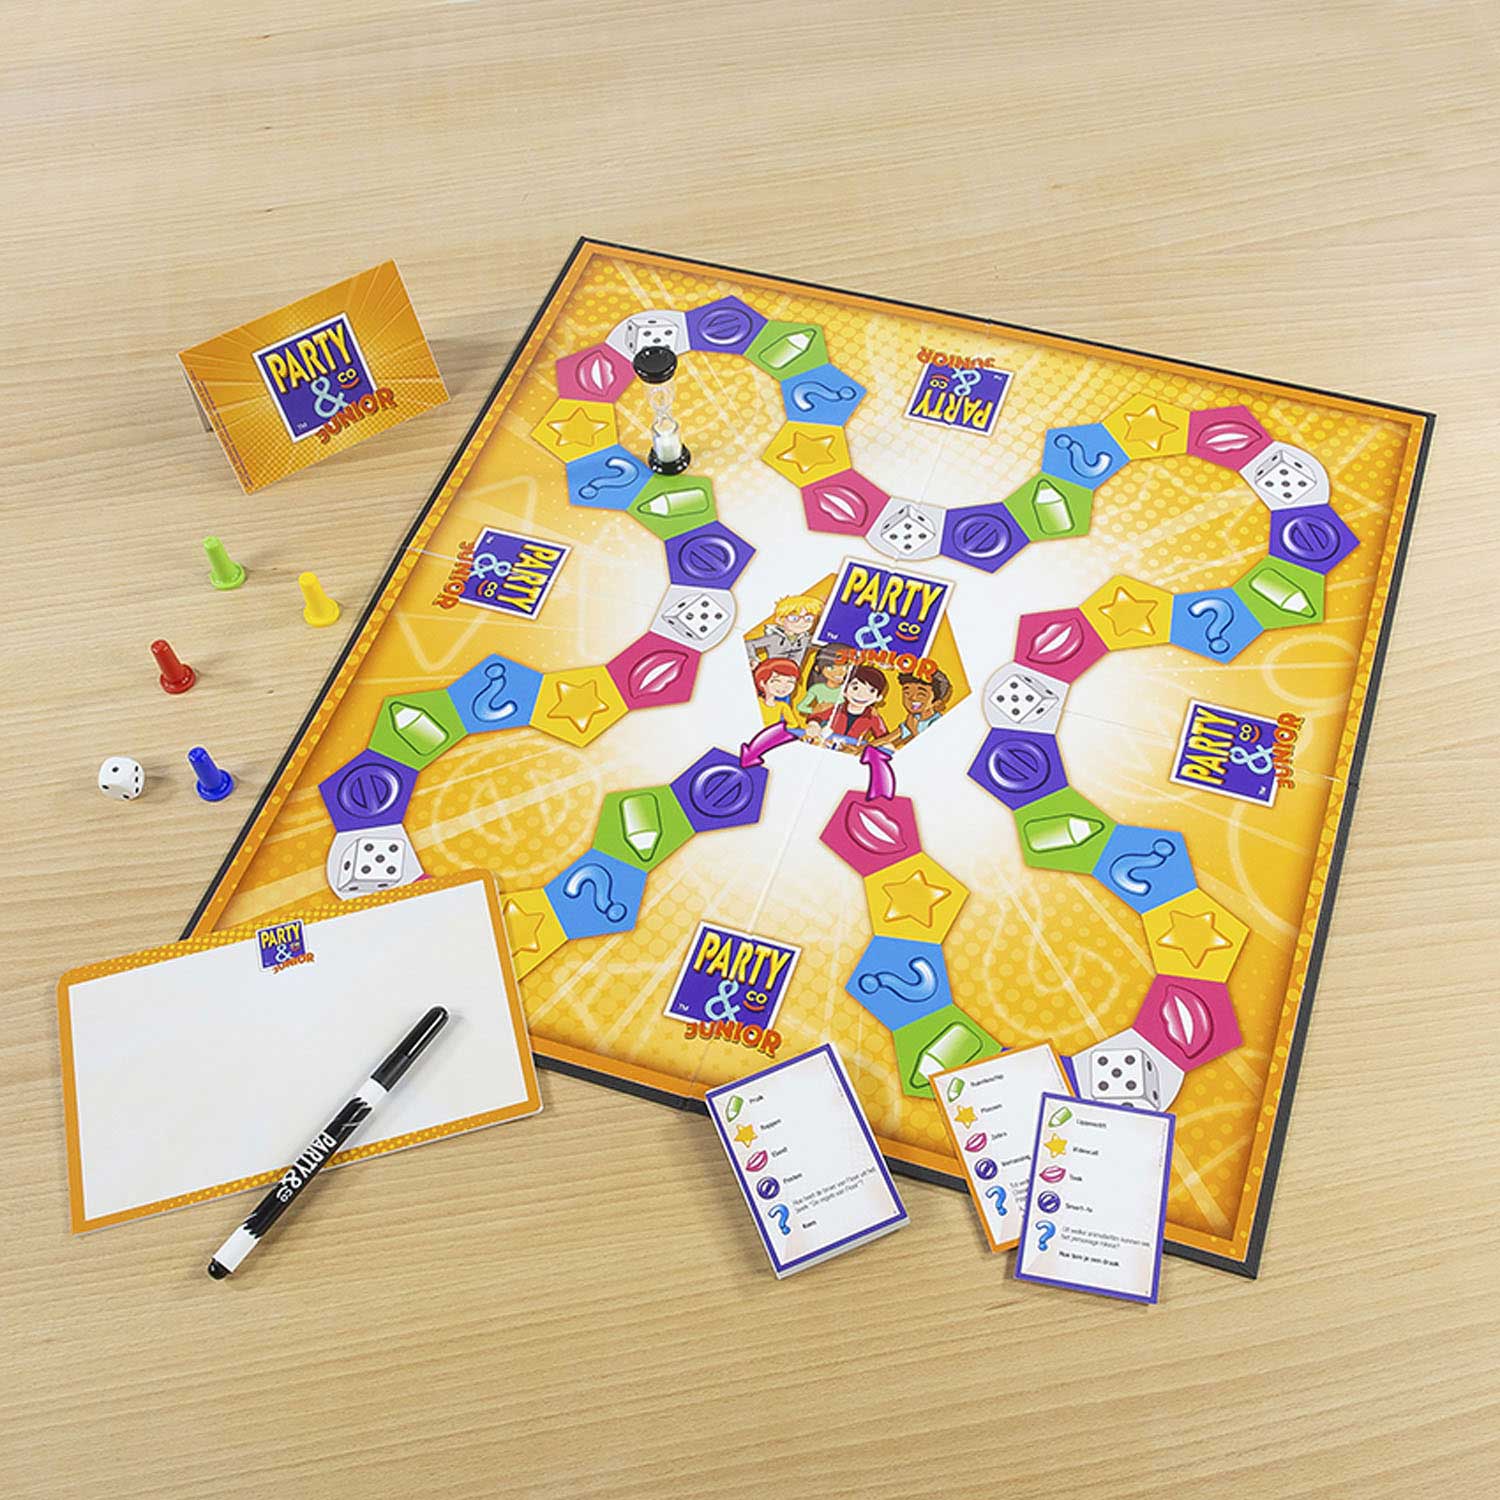 Party & Co: Junior, Board Game